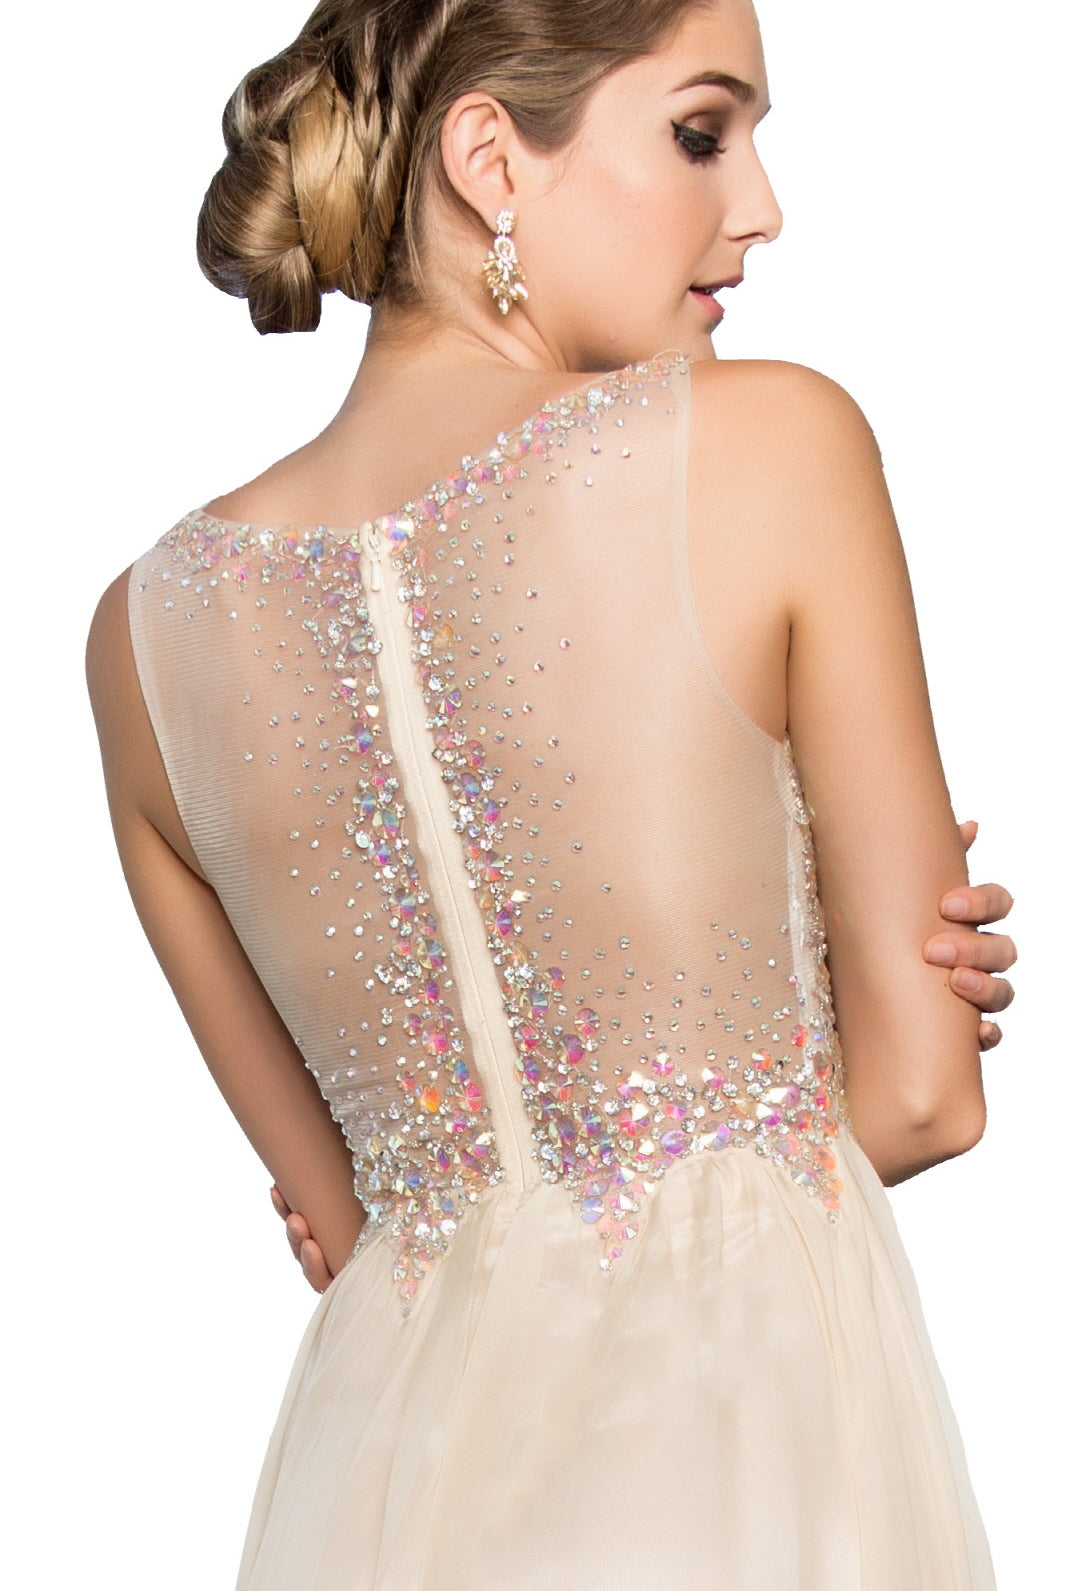 Dress with Sequin Embellished Sheer Bodice and Corset Back-smcdress